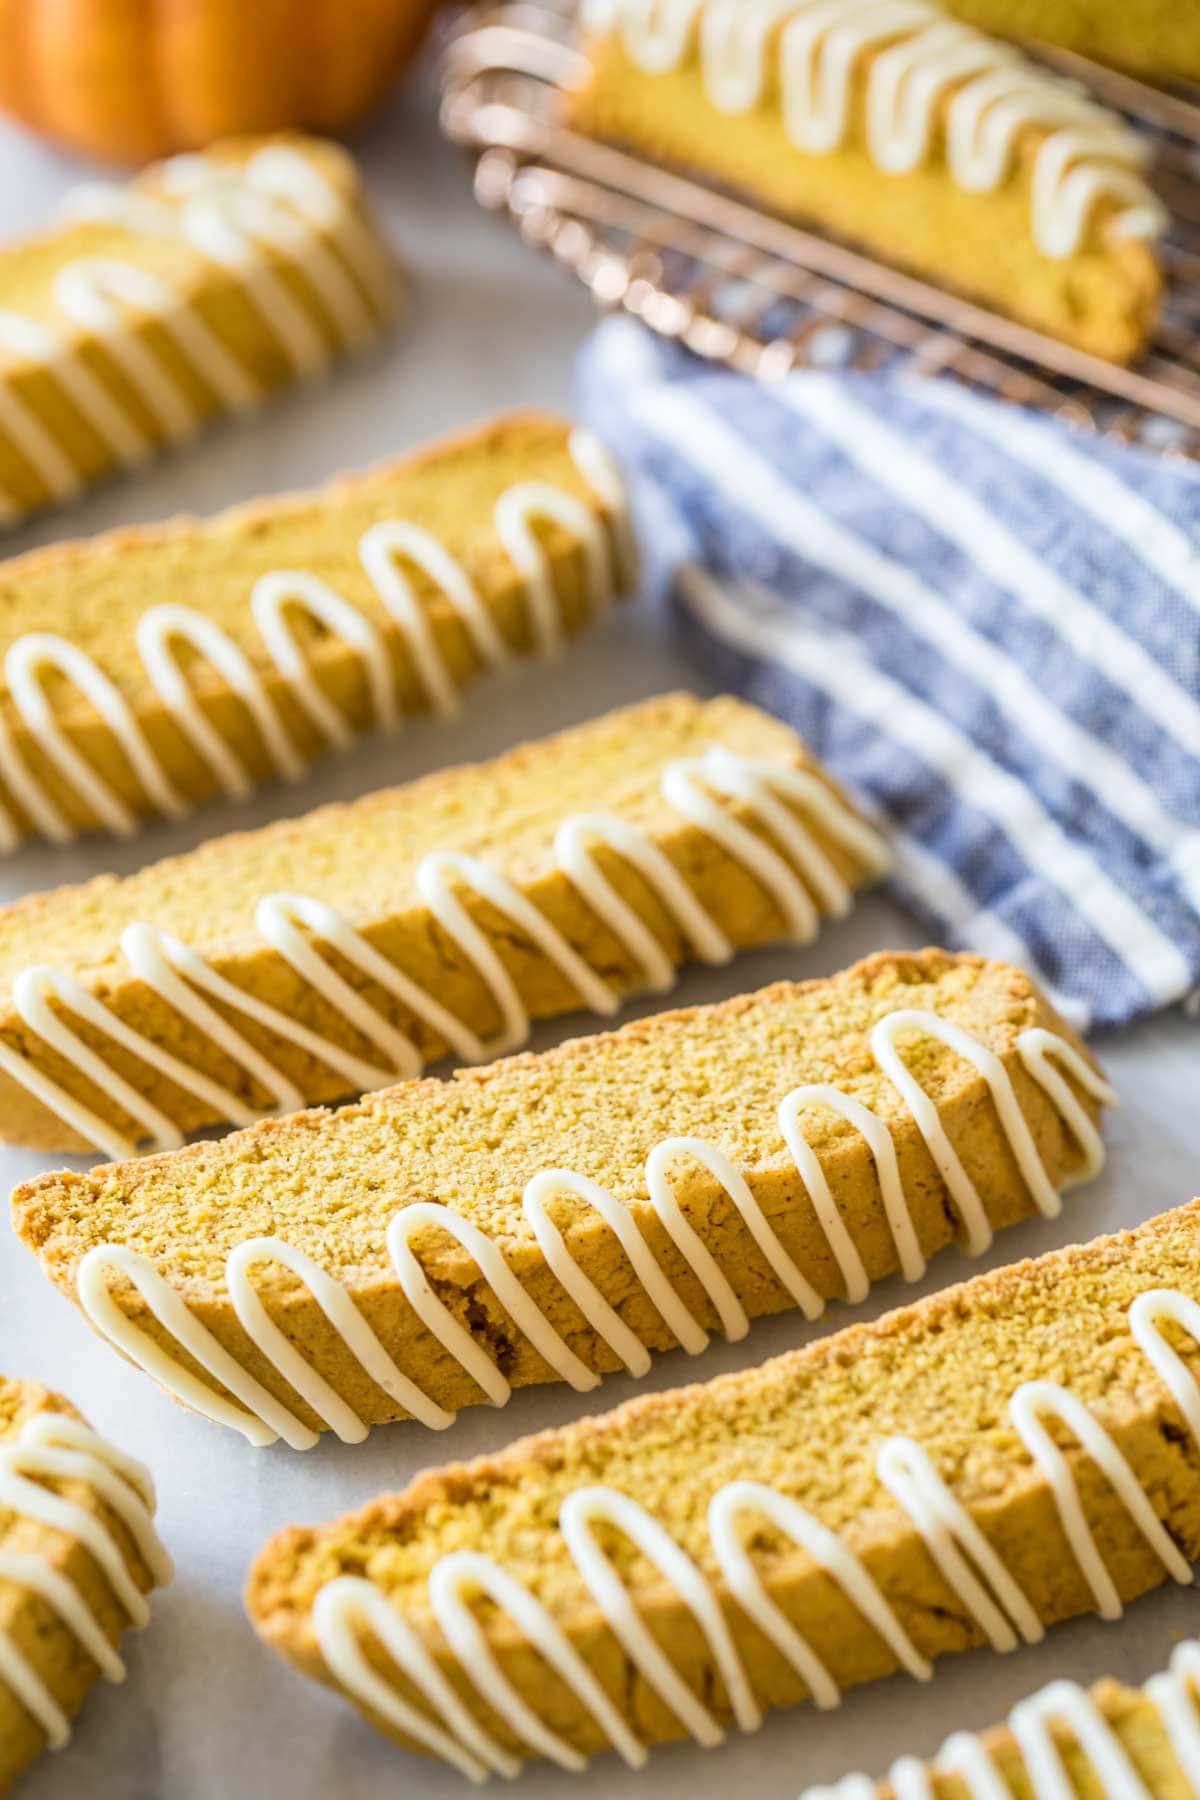 Pumpkin flavored biscotti drizzled with white chocolate lined up in a row.